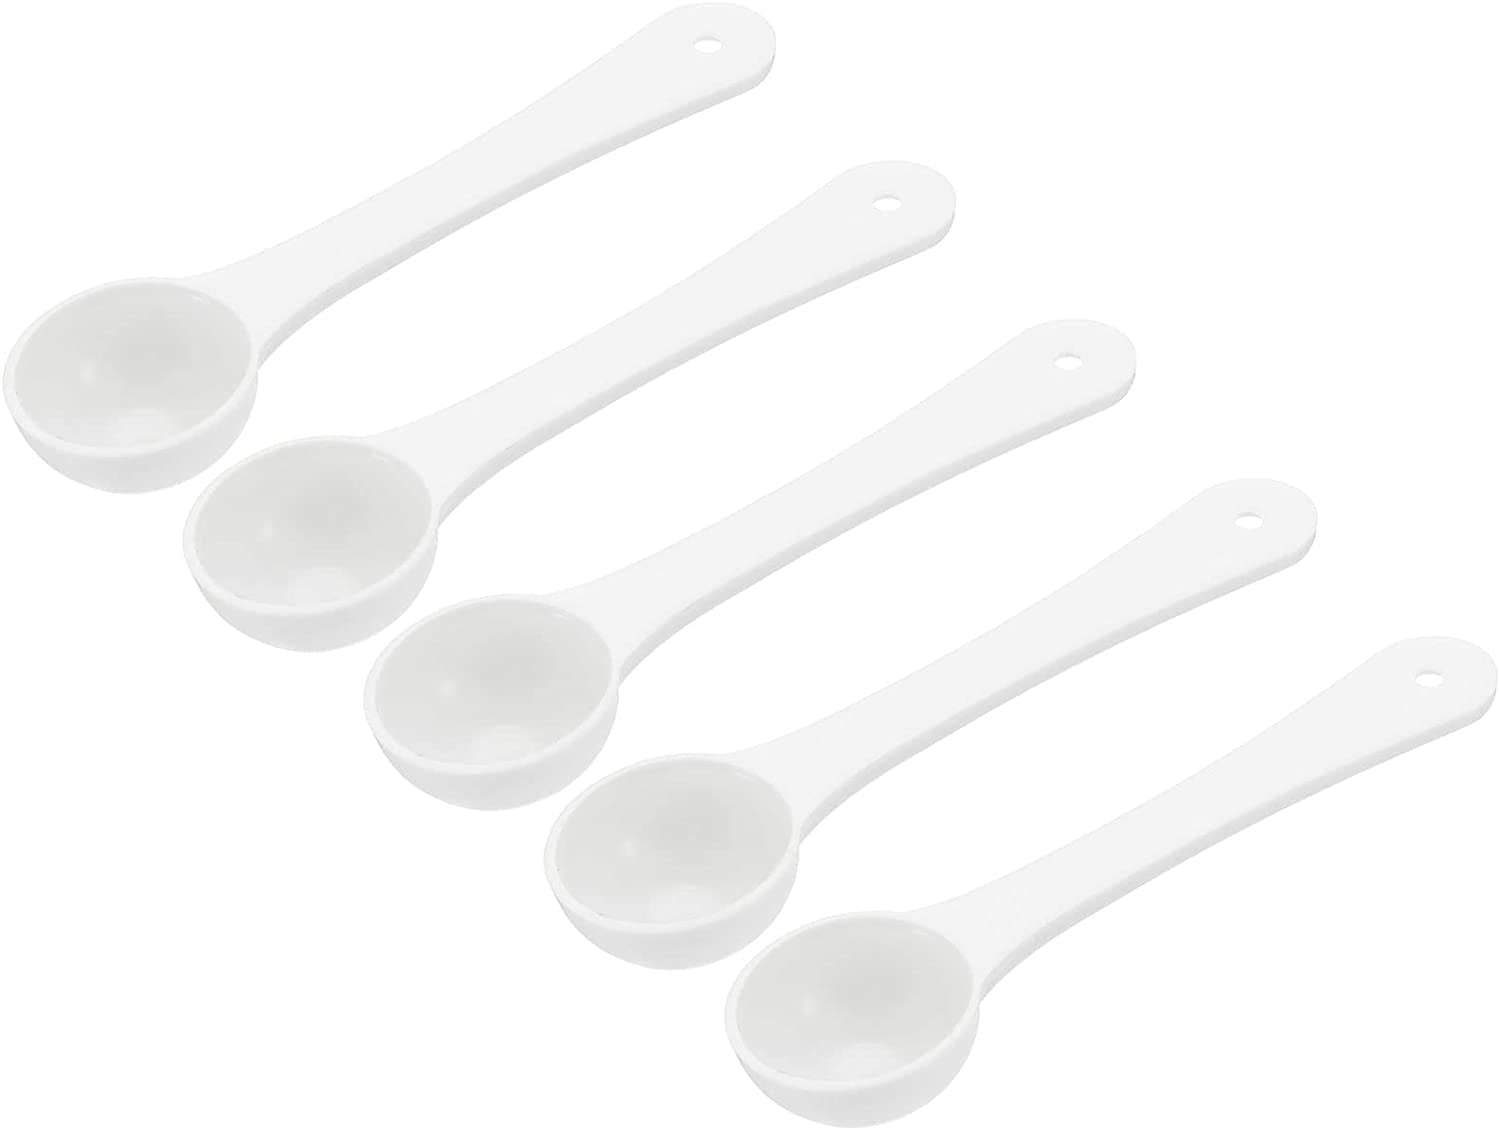 Micro Spoons 5 Gram Measuring Scoop Plastic Round Bottom with Hole 15Pcs